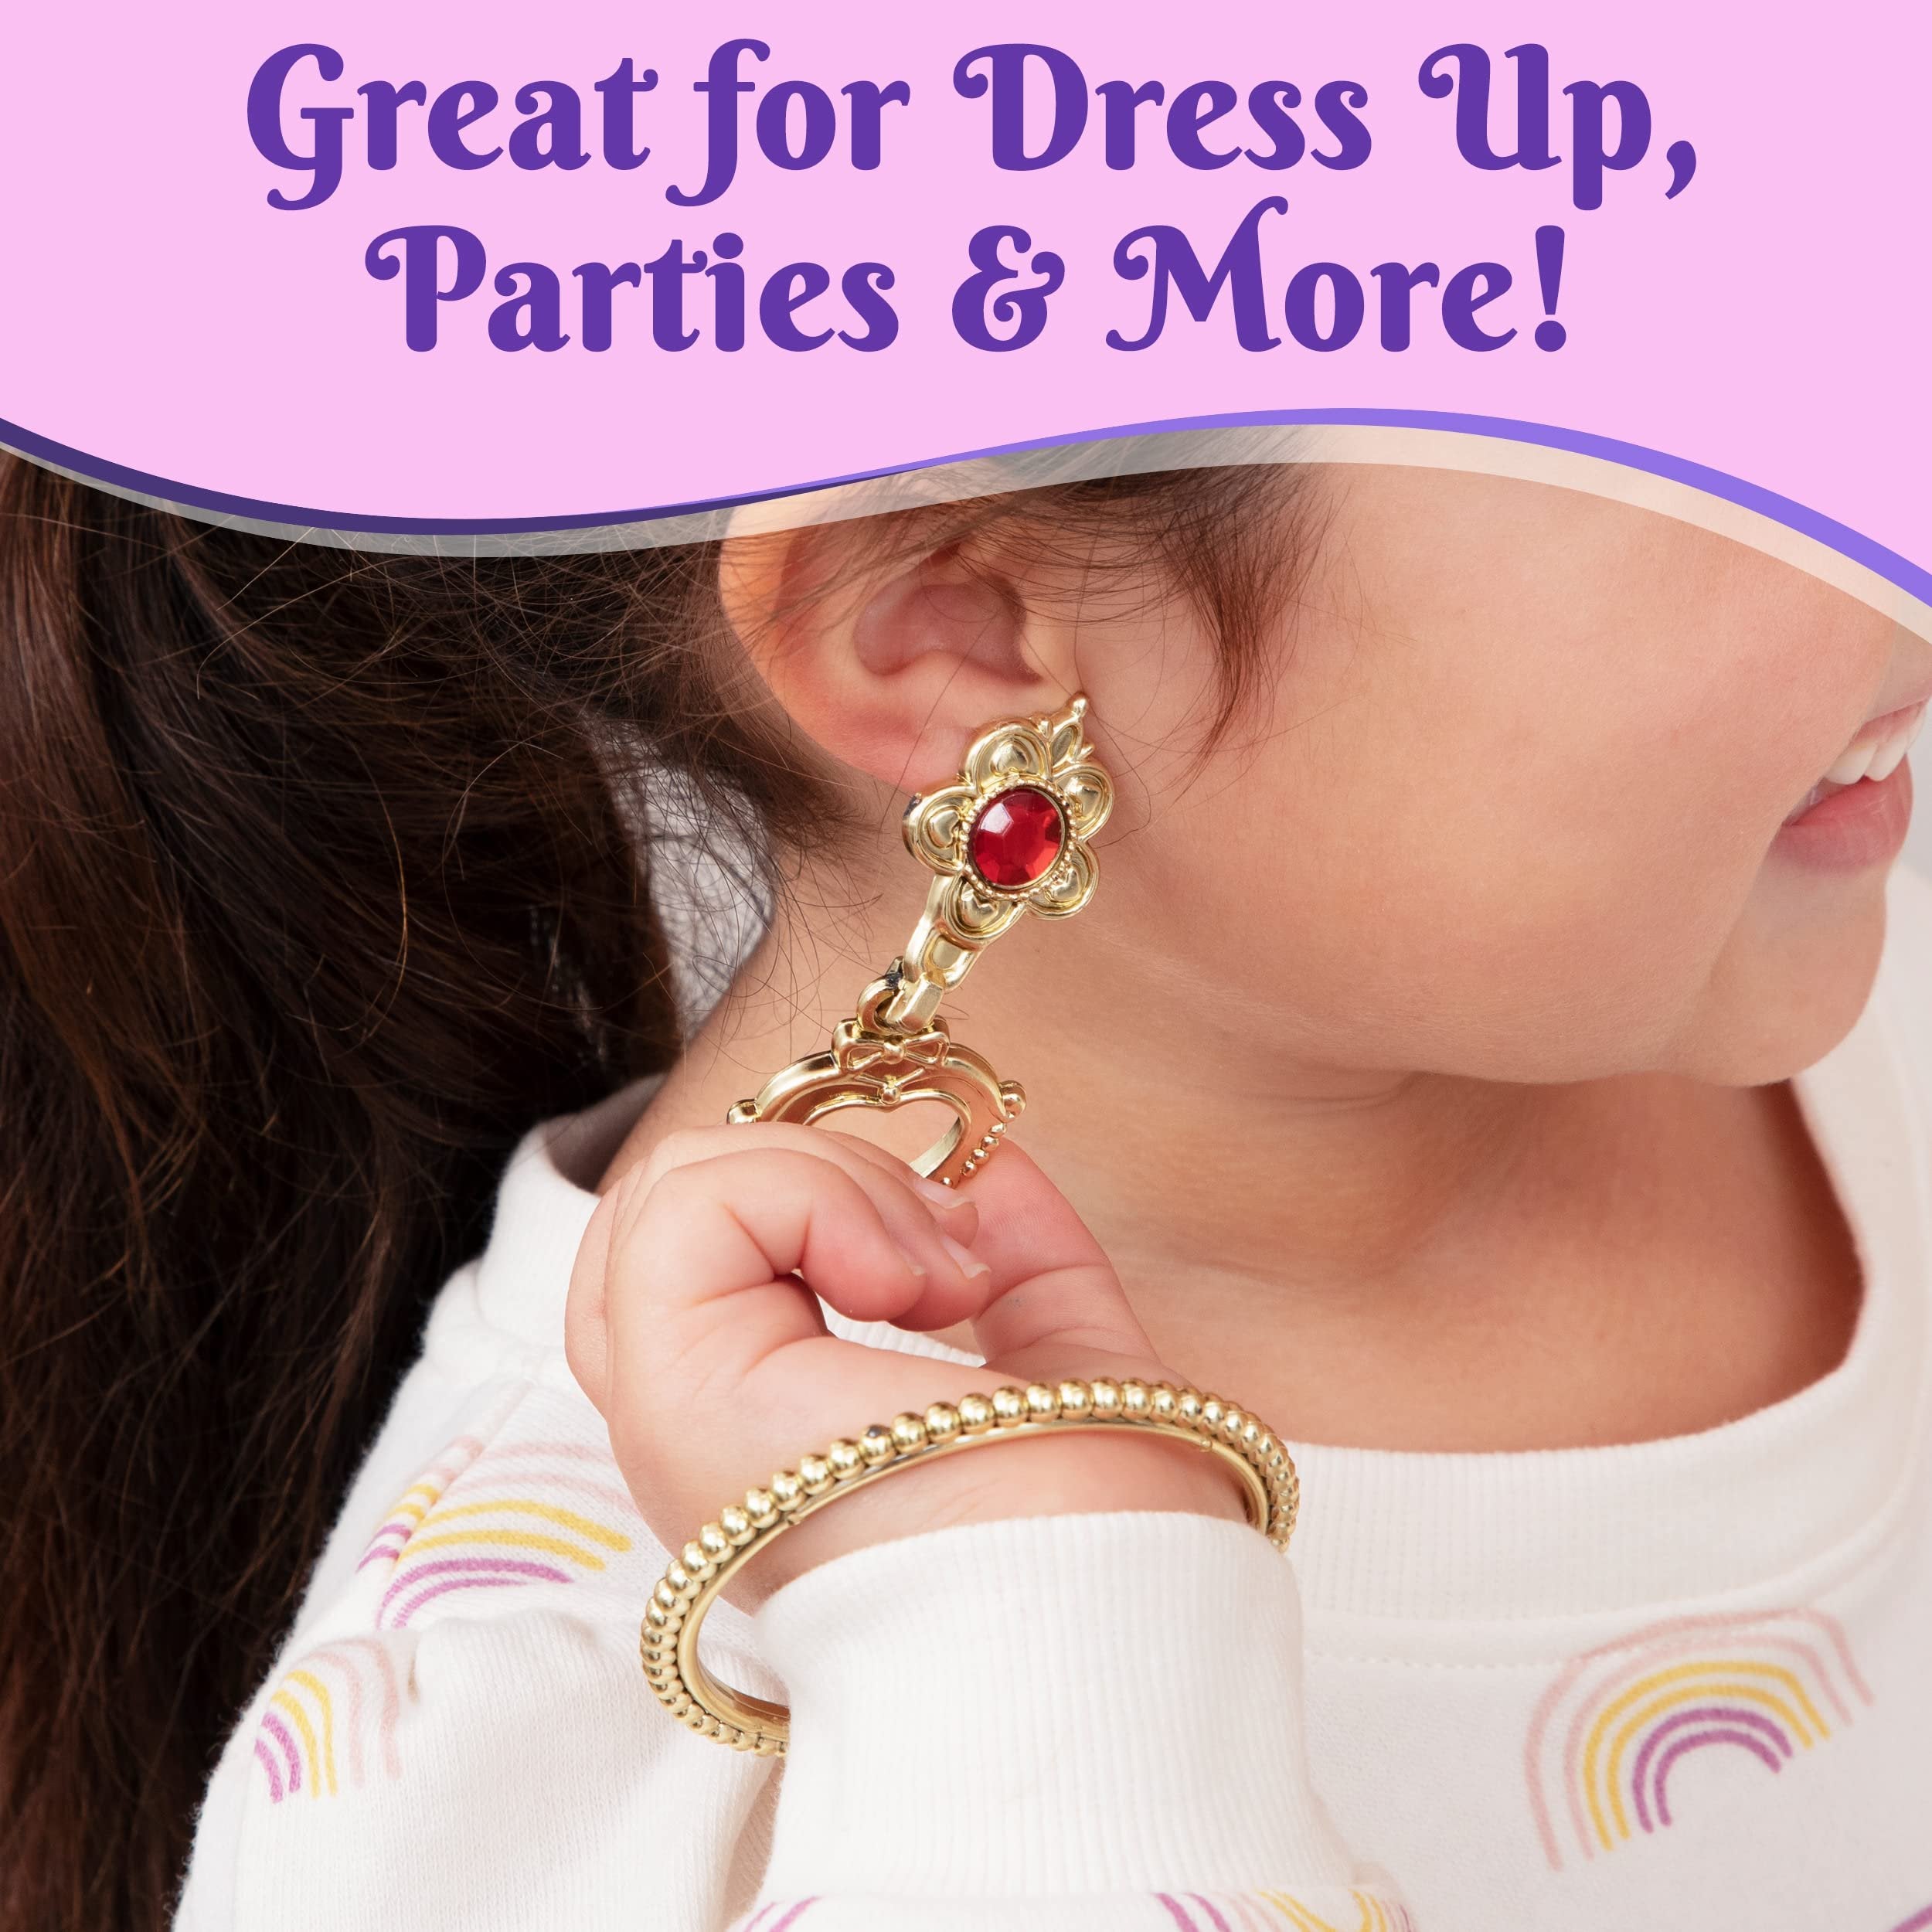 Princess Toddler Dress Up Shoes & Jewelry for Little Girls - Toddler Pretend Play Boutique Set - 4 Pairs of Shoes, Earrings, Bracelets & Rings - Gift Toy Set for 3+ Years Old Girl - Gifts for Girls